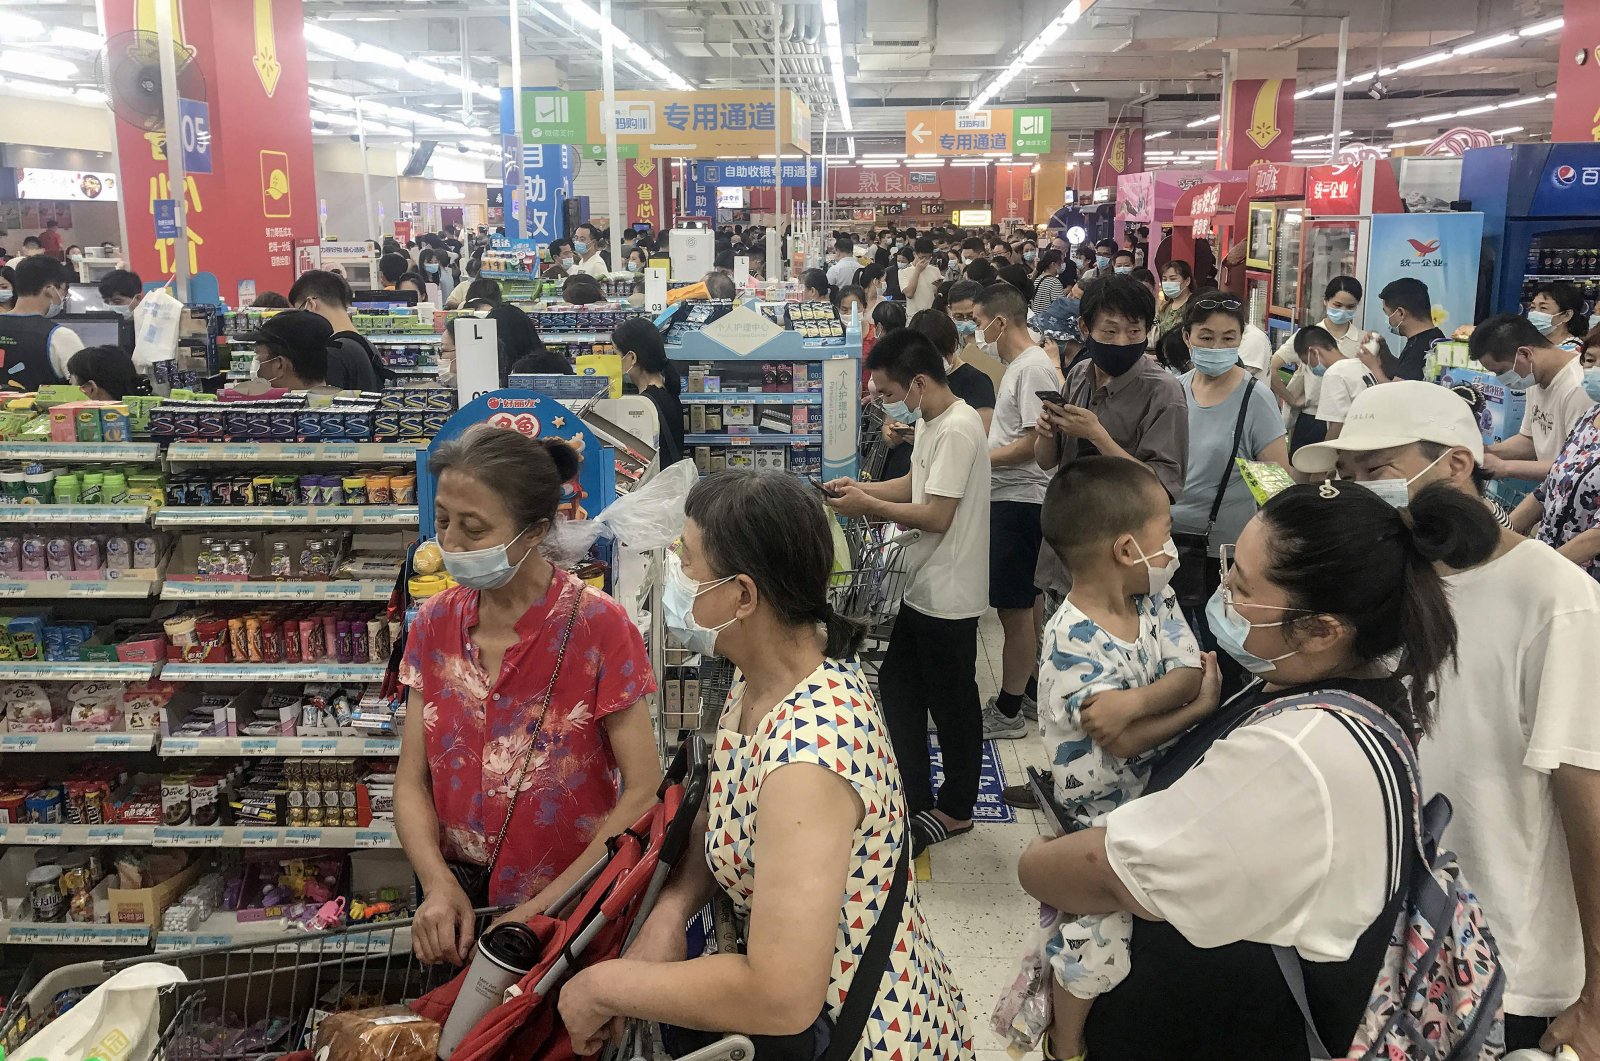 People buying items at a supermarket in Wuhan, in China's central Hubei province, as authorities said they would test its entire population for COVID-19 after the central Chinese city where the coronavirus emerged reported its first local infections in more than a year, Aug. 2, 2021. (AFP Photo)